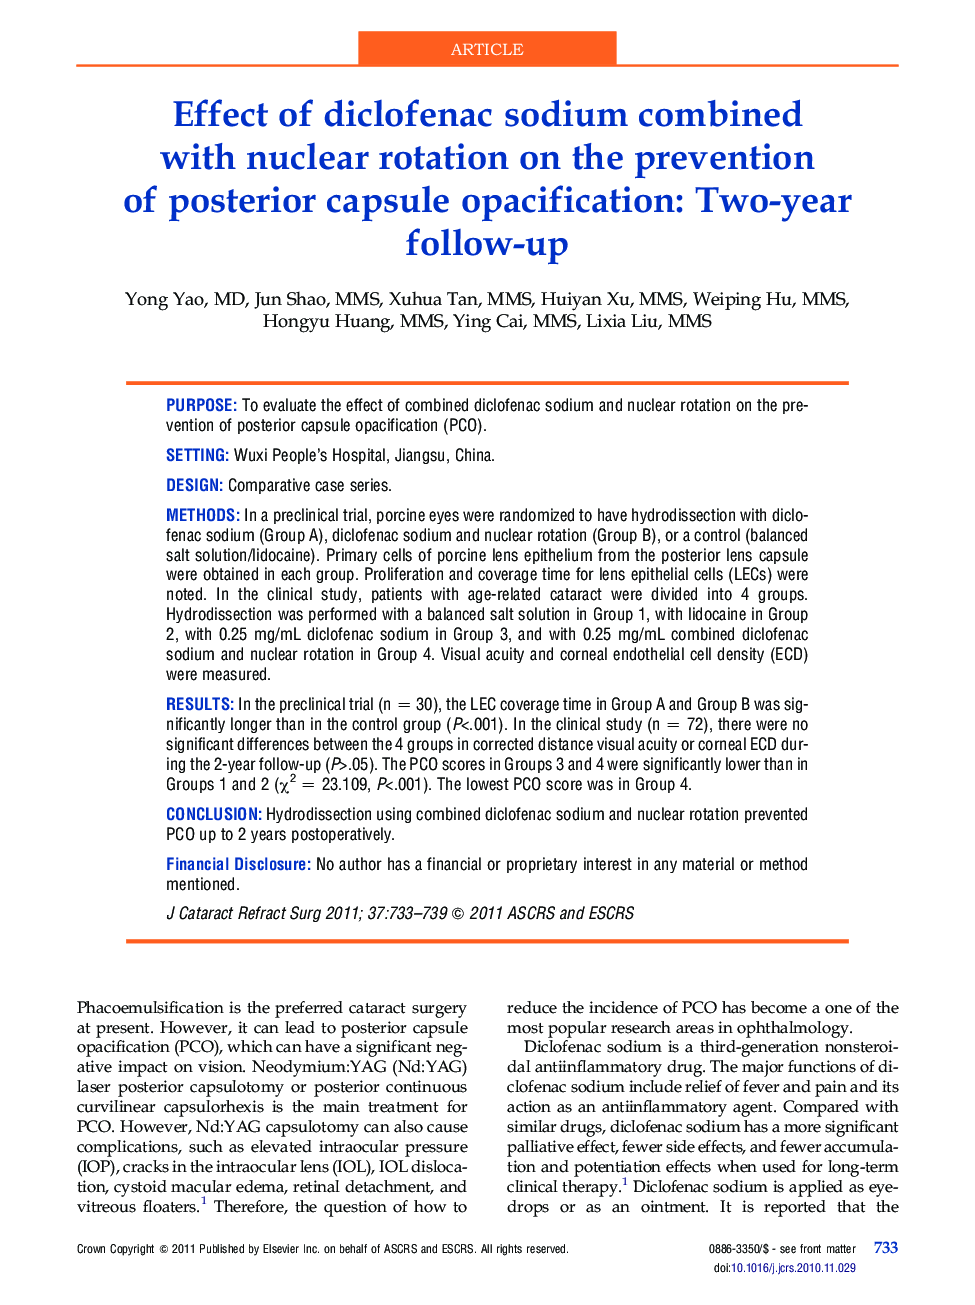 Effect of diclofenac sodium combined with nuclear rotation on the prevention of posterior capsule opacification: Two-year follow-up